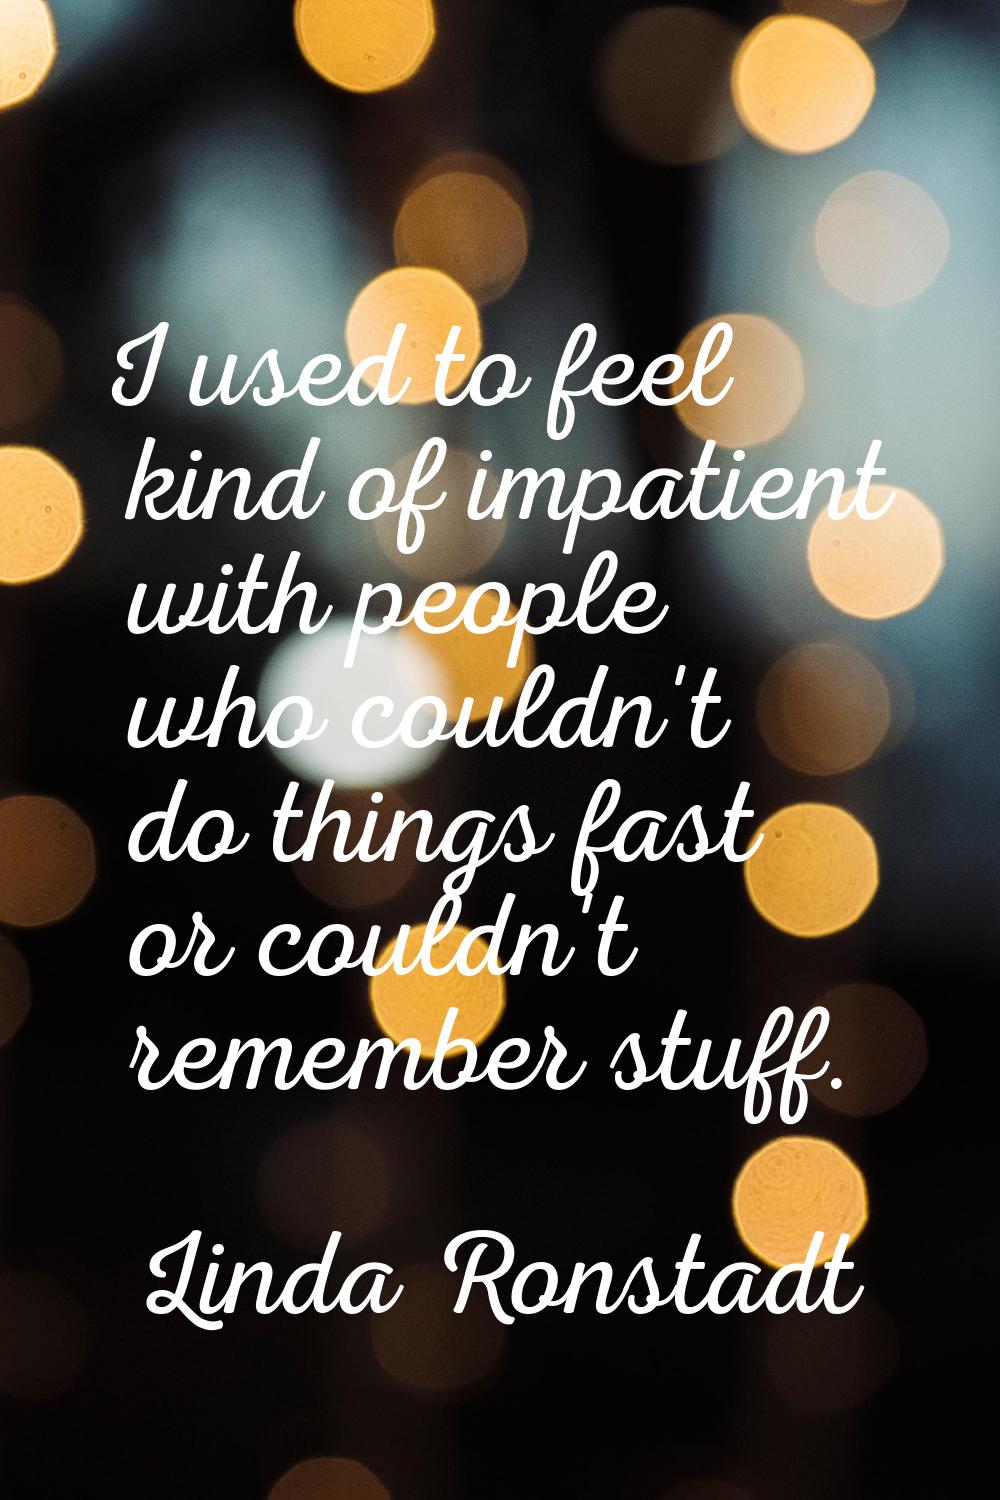 I used to feel kind of impatient with people who couldn't do things fast or couldn't remember stuff